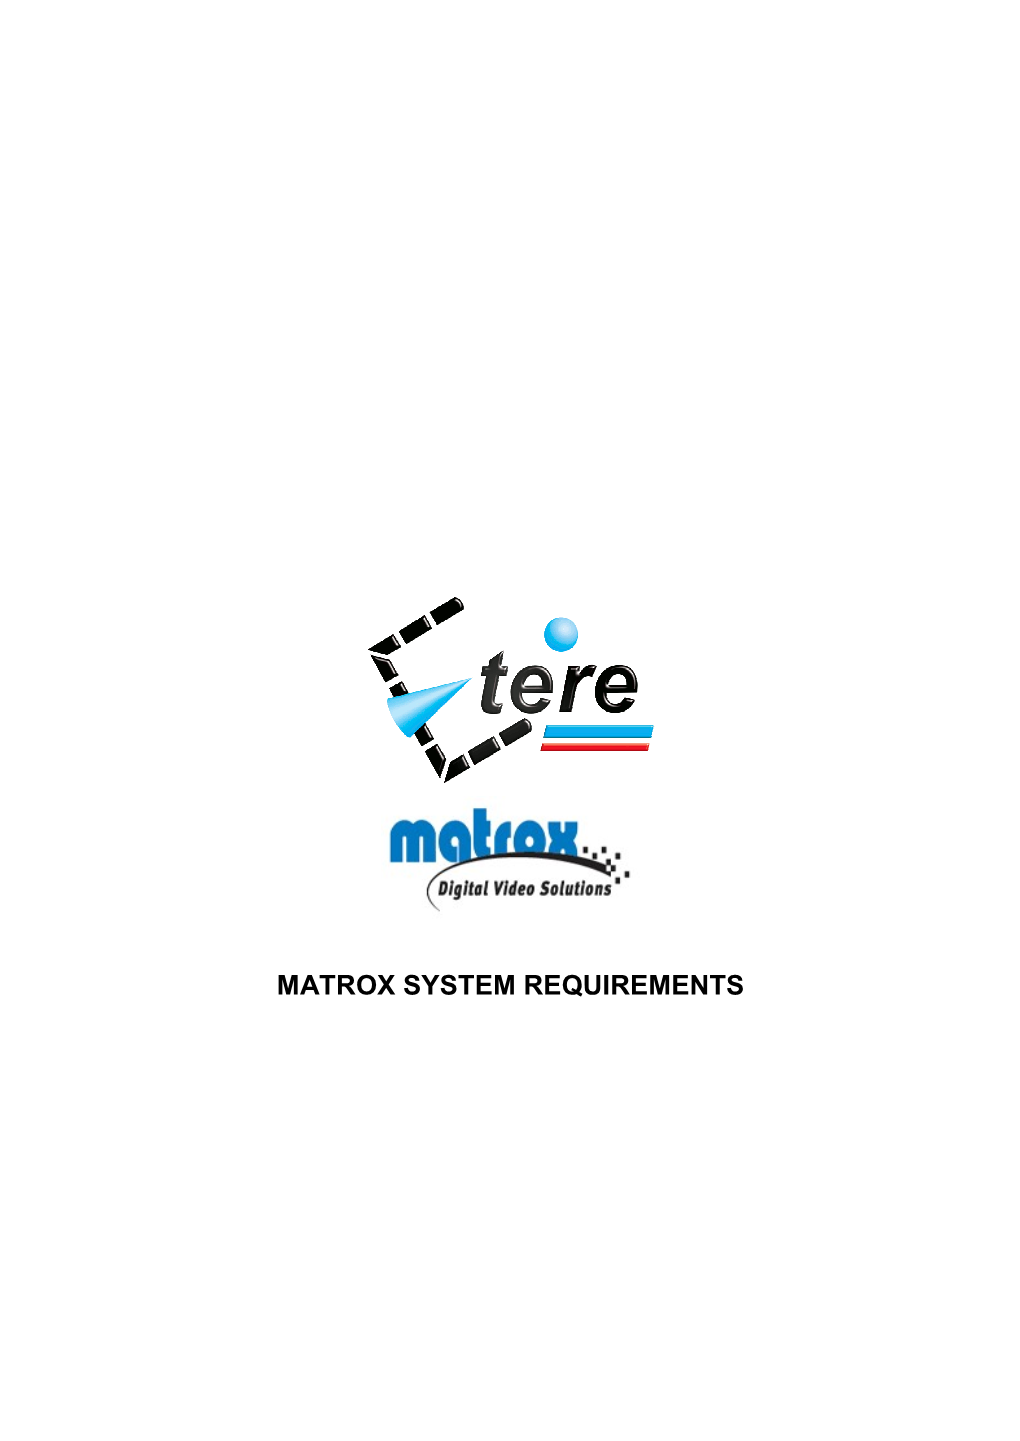 Matrox System Requirements